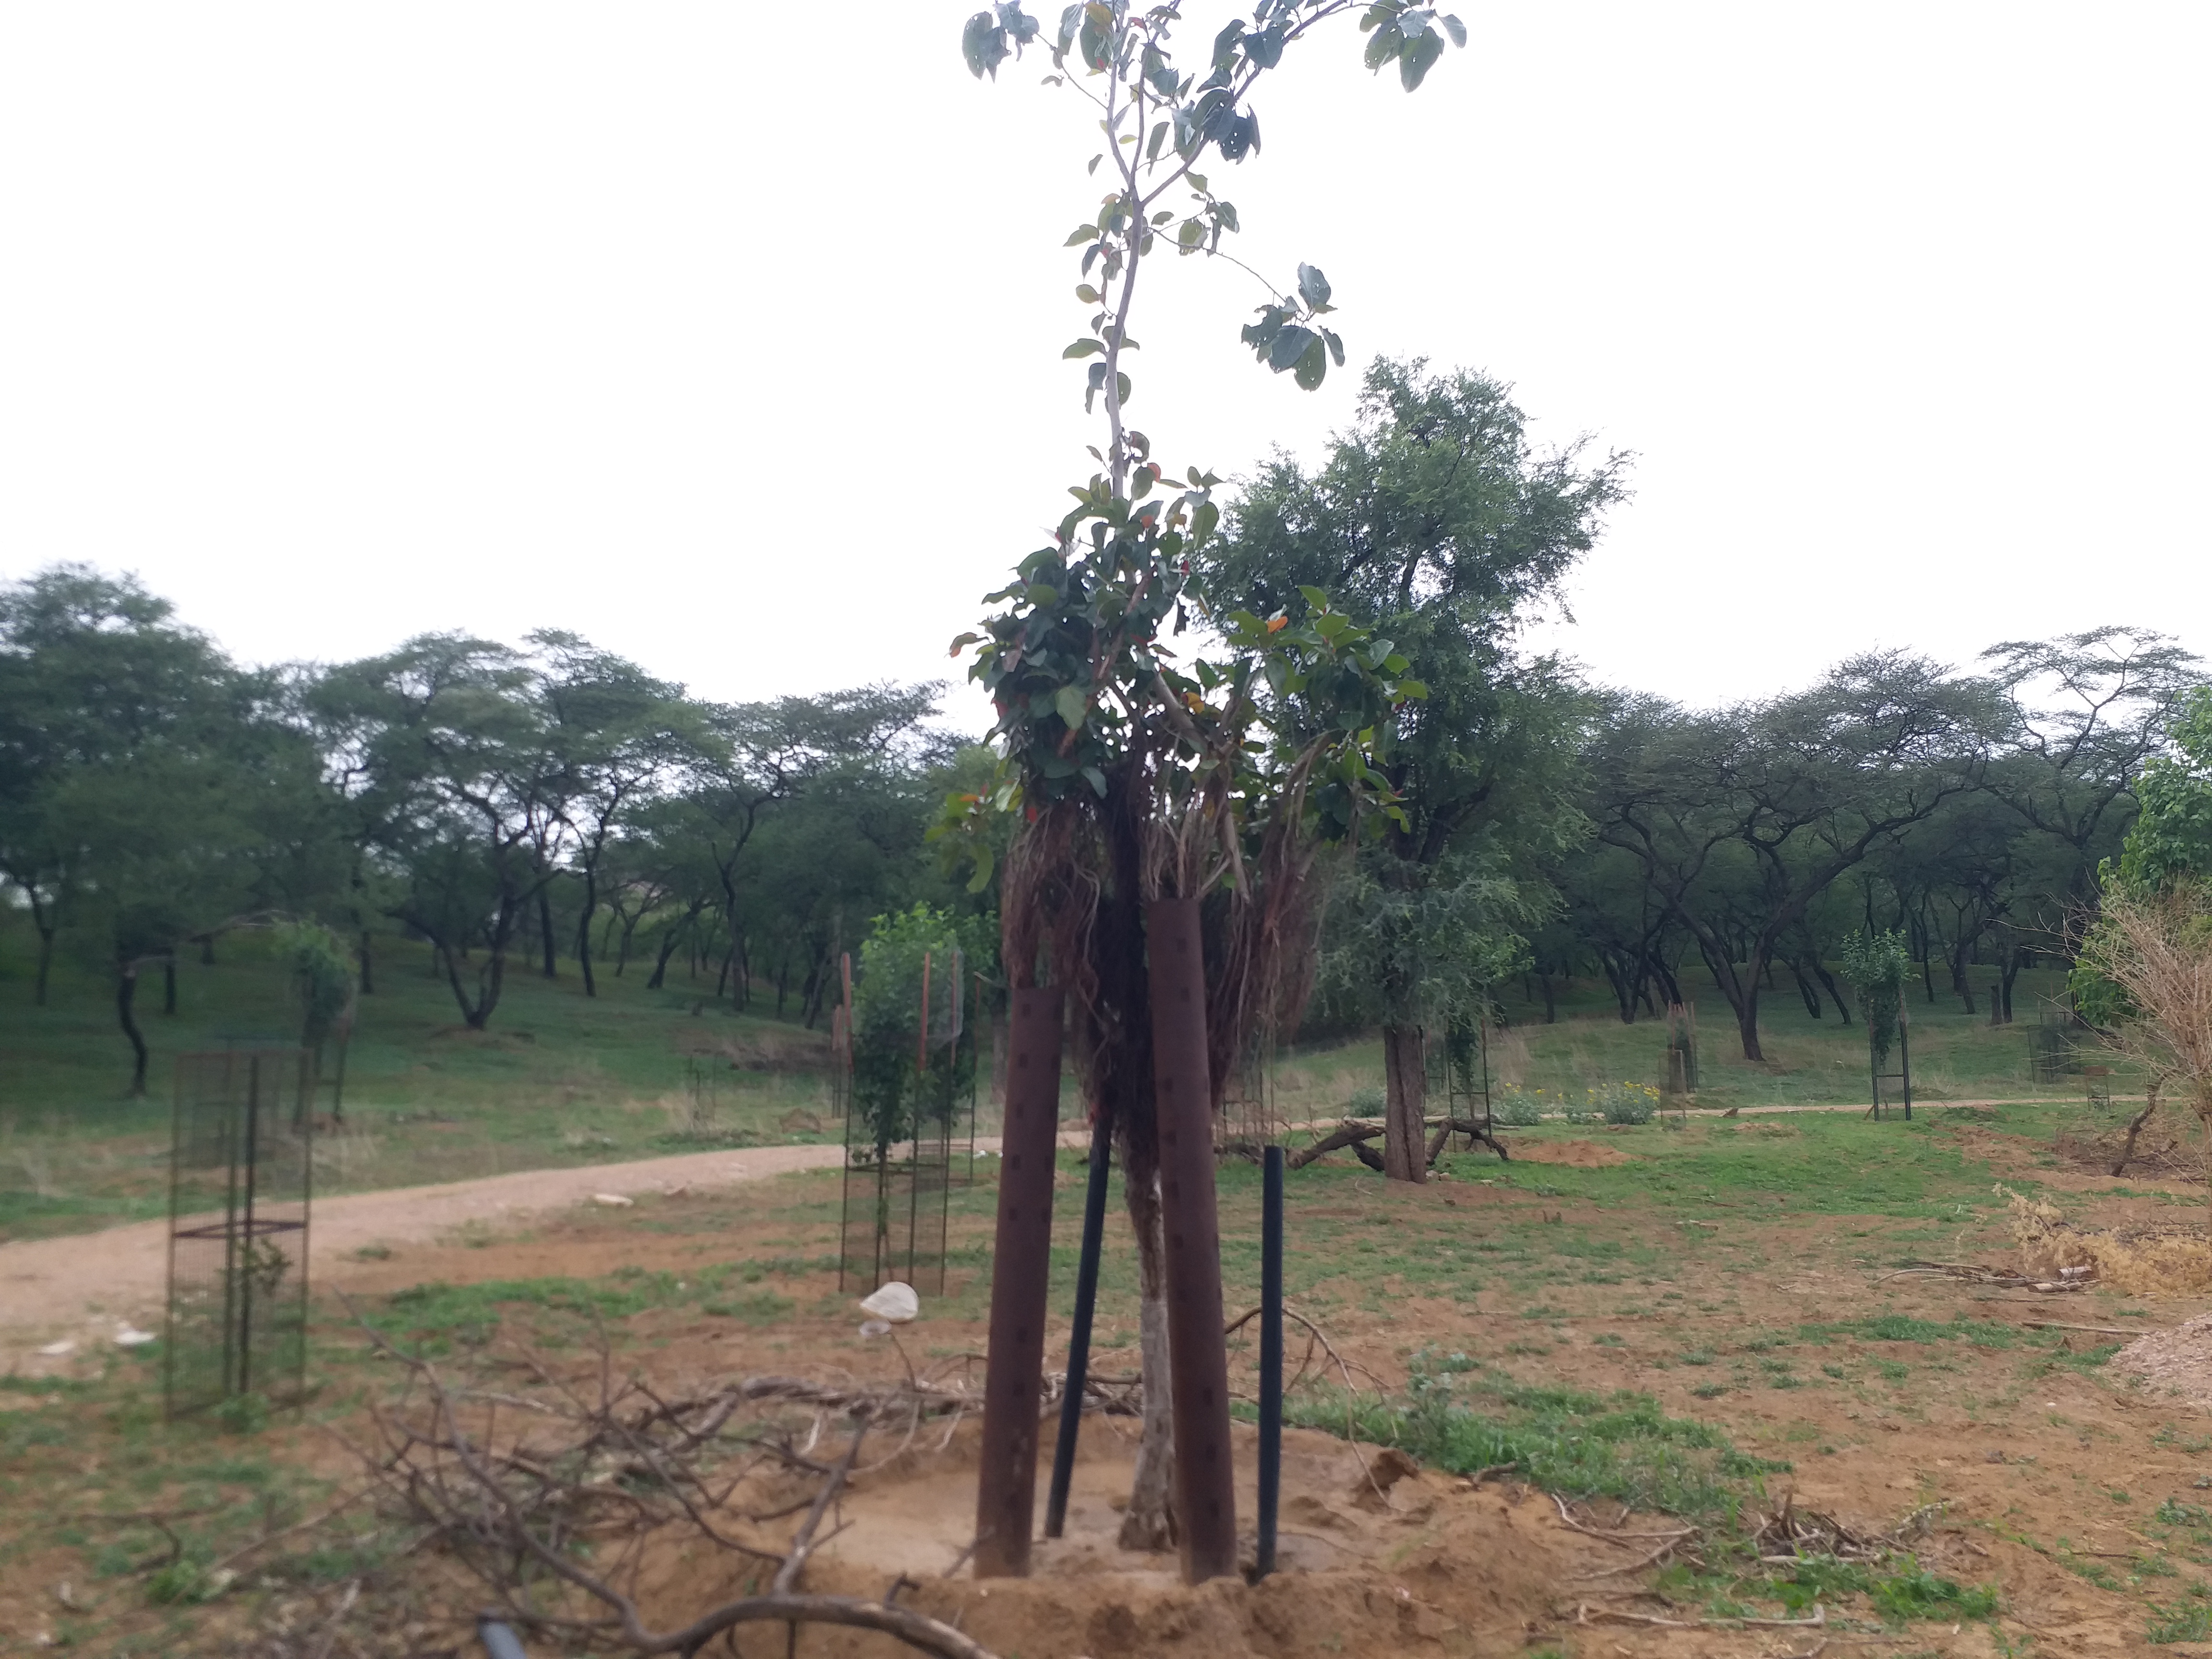 Trees are transplanted in Jhalana forest of Jaipur